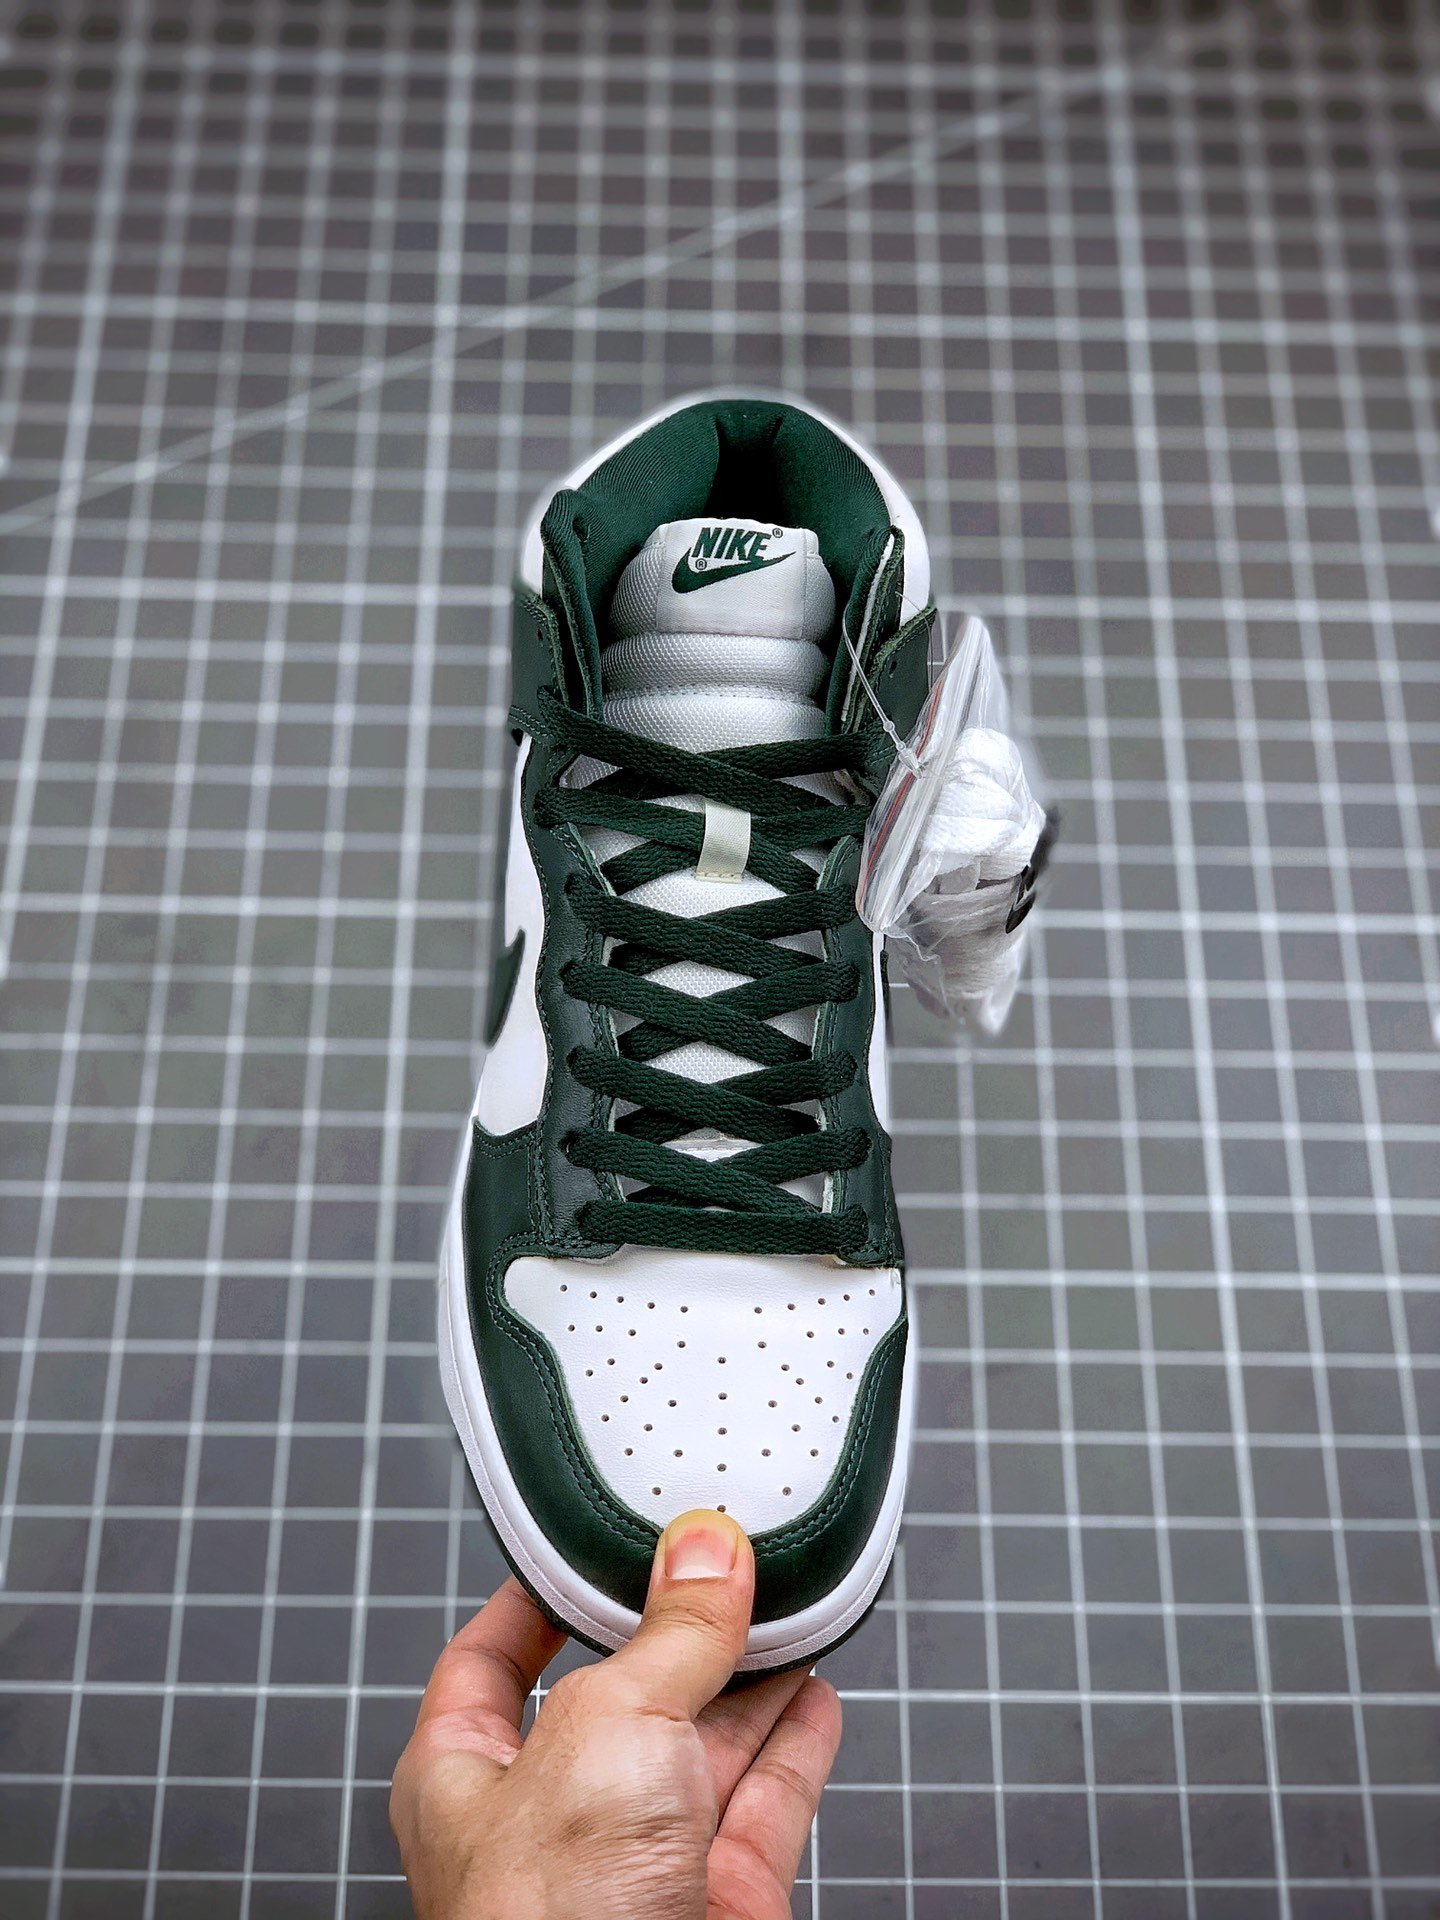 Nike Dunk High SP “Pro Green” CZ8149-100 For Sale – Sneaker Hello